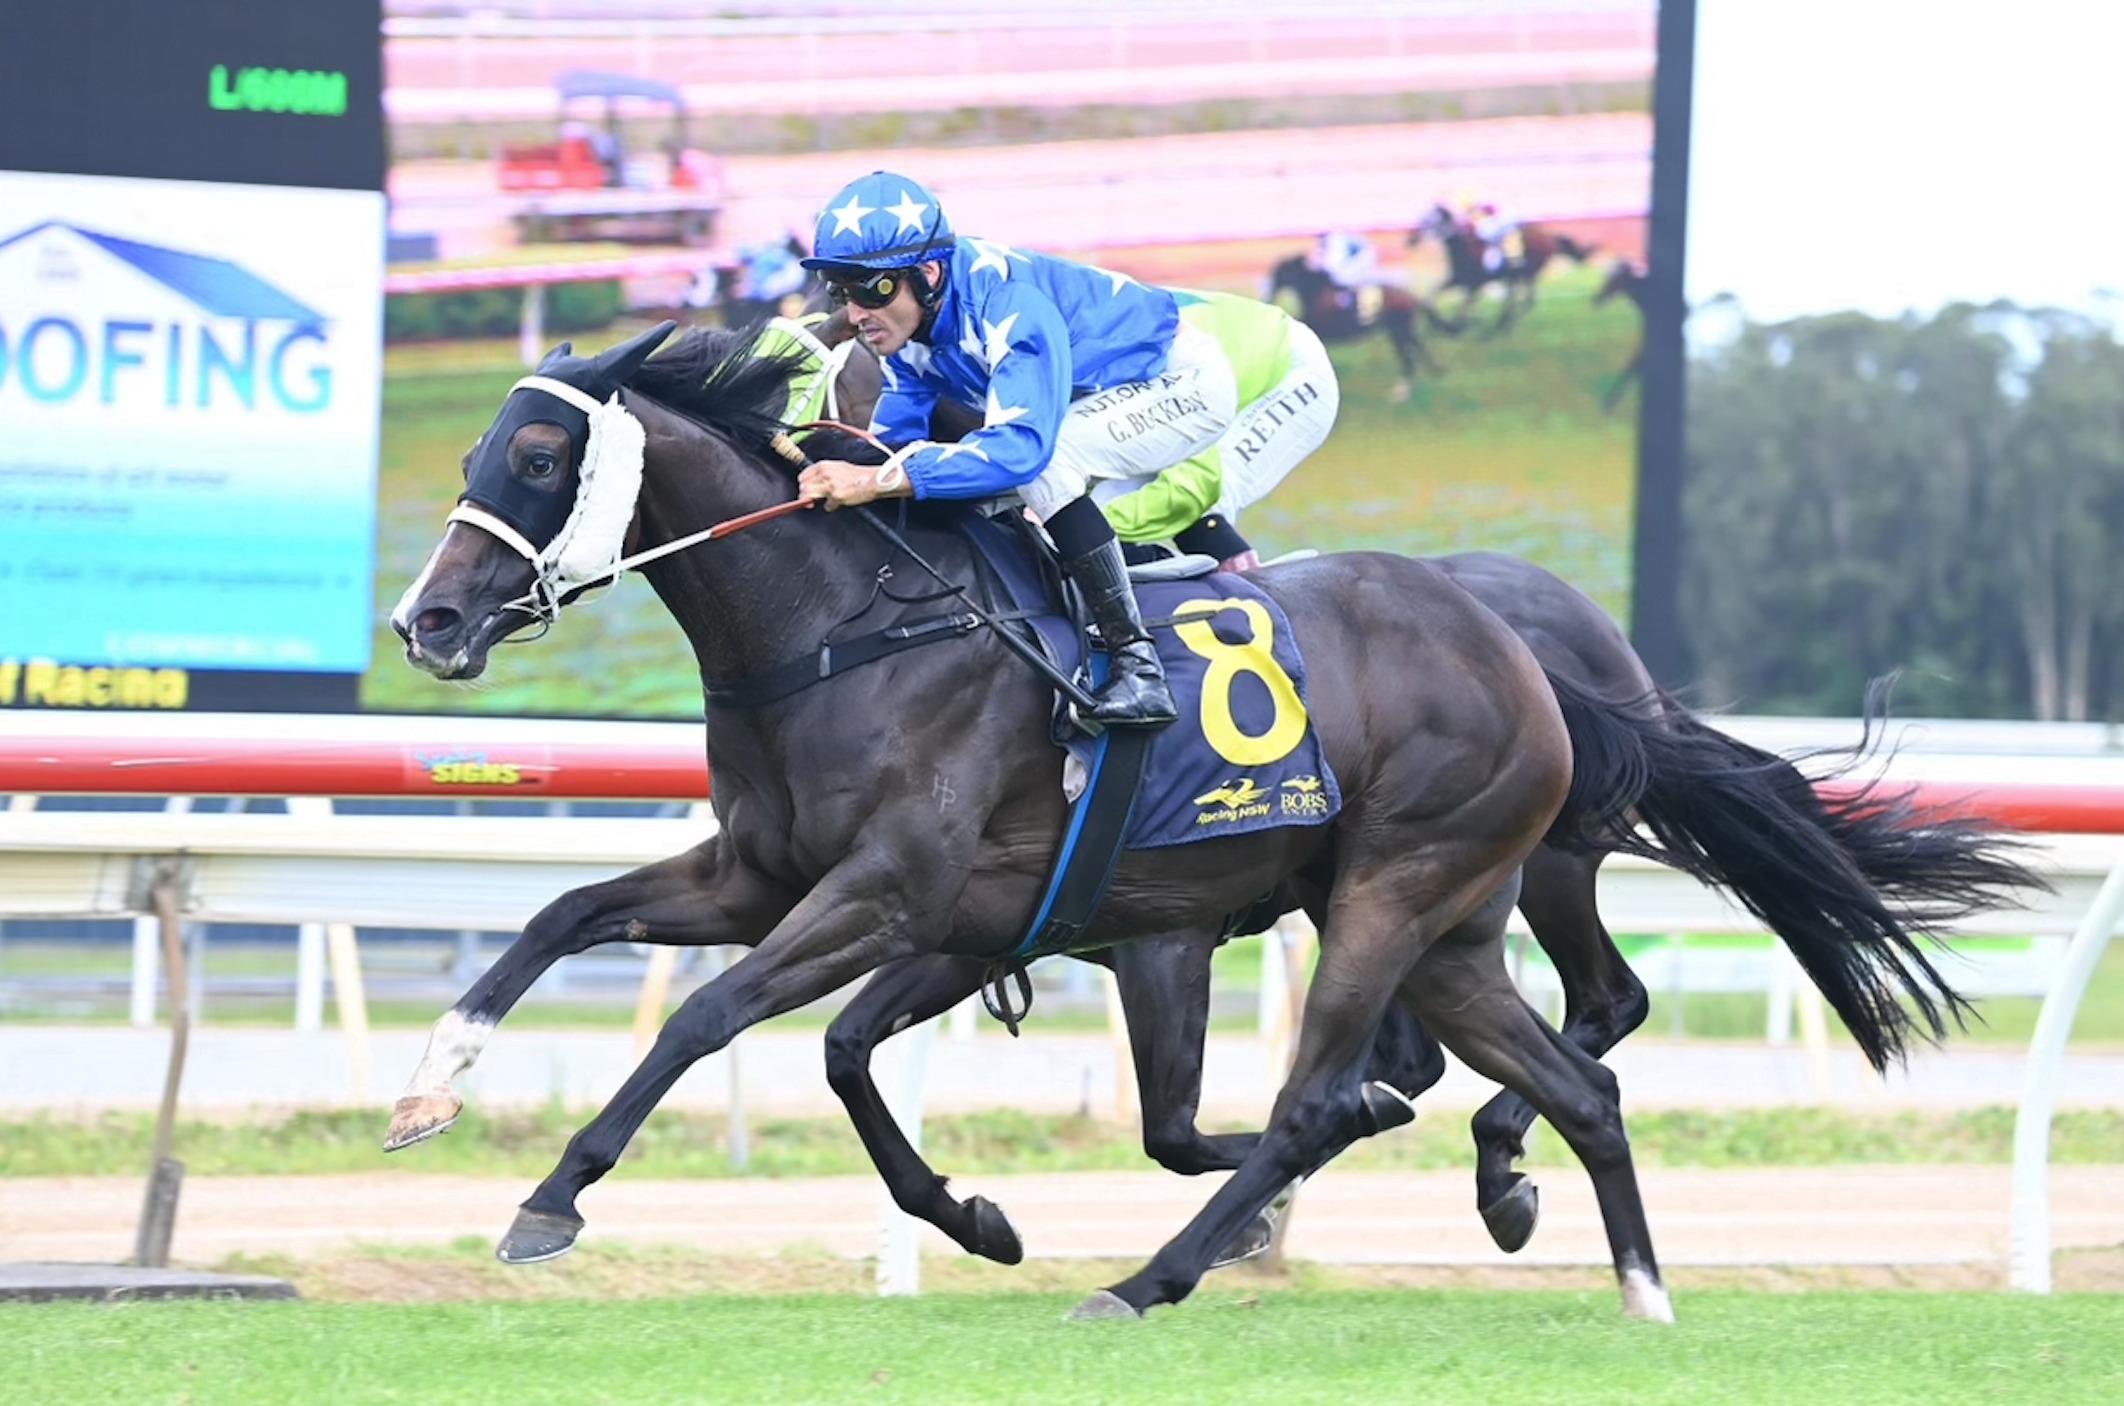 BUCKLEY CLAIMS RIDING HONOURS 10